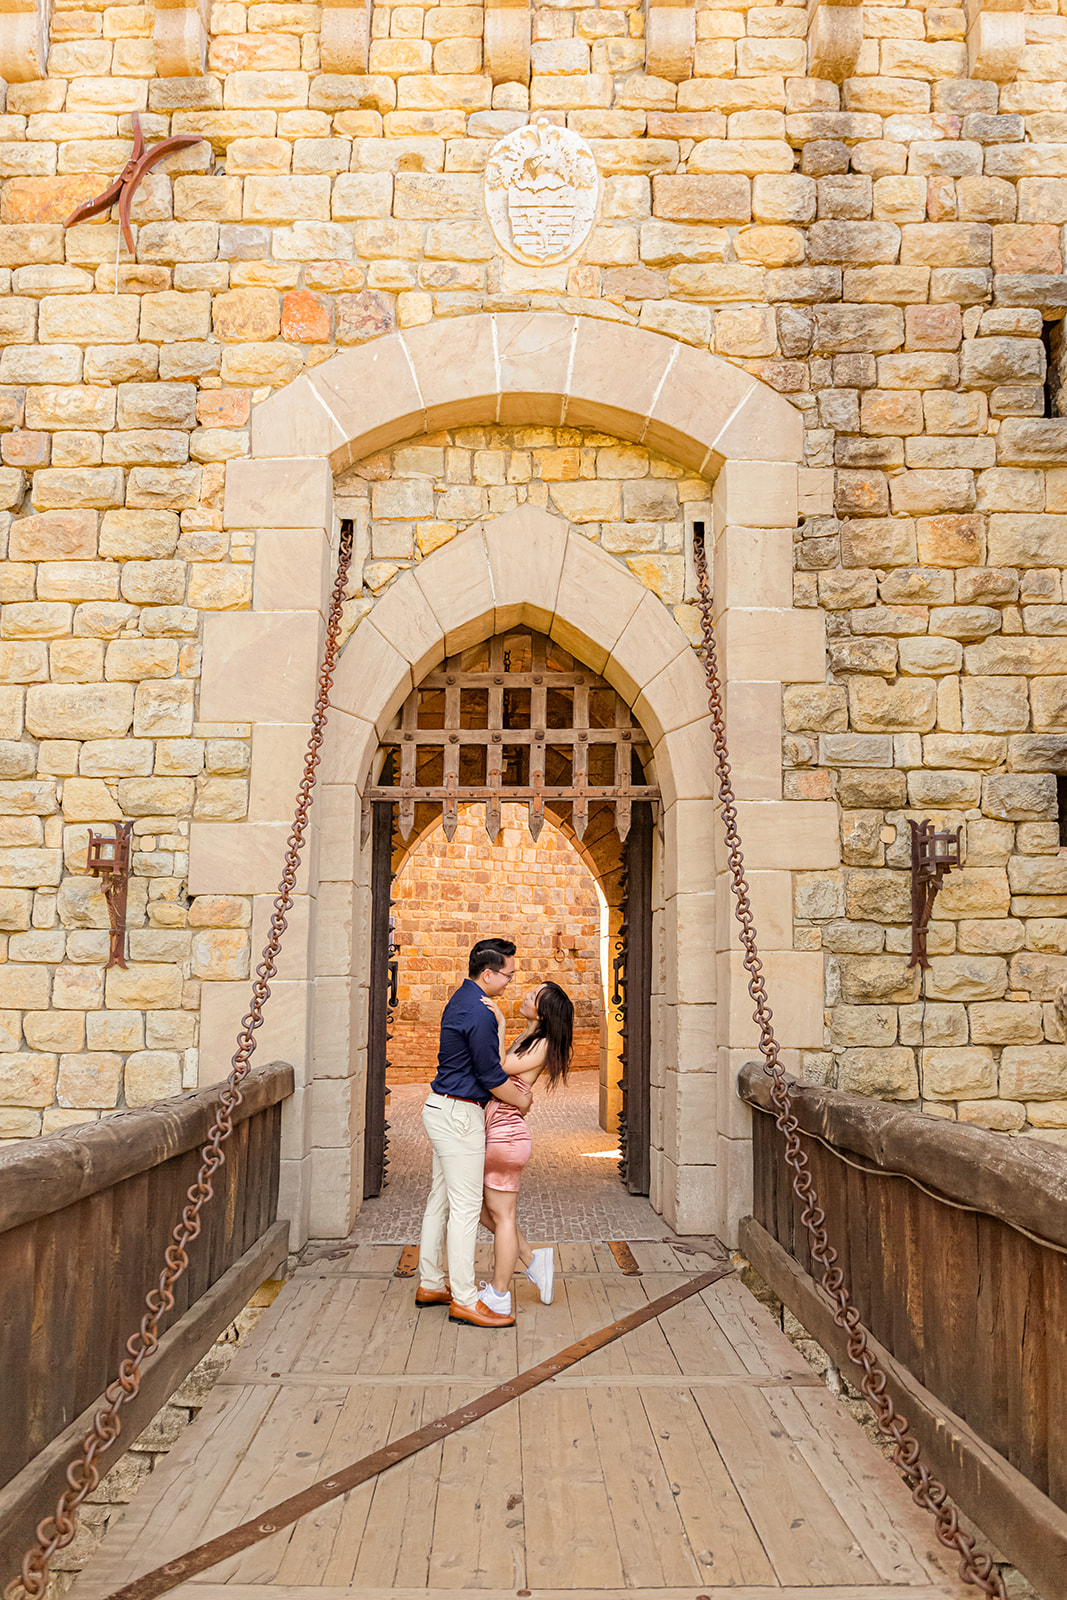 nonbinary person and their fiancée in front of a castle drawbridge